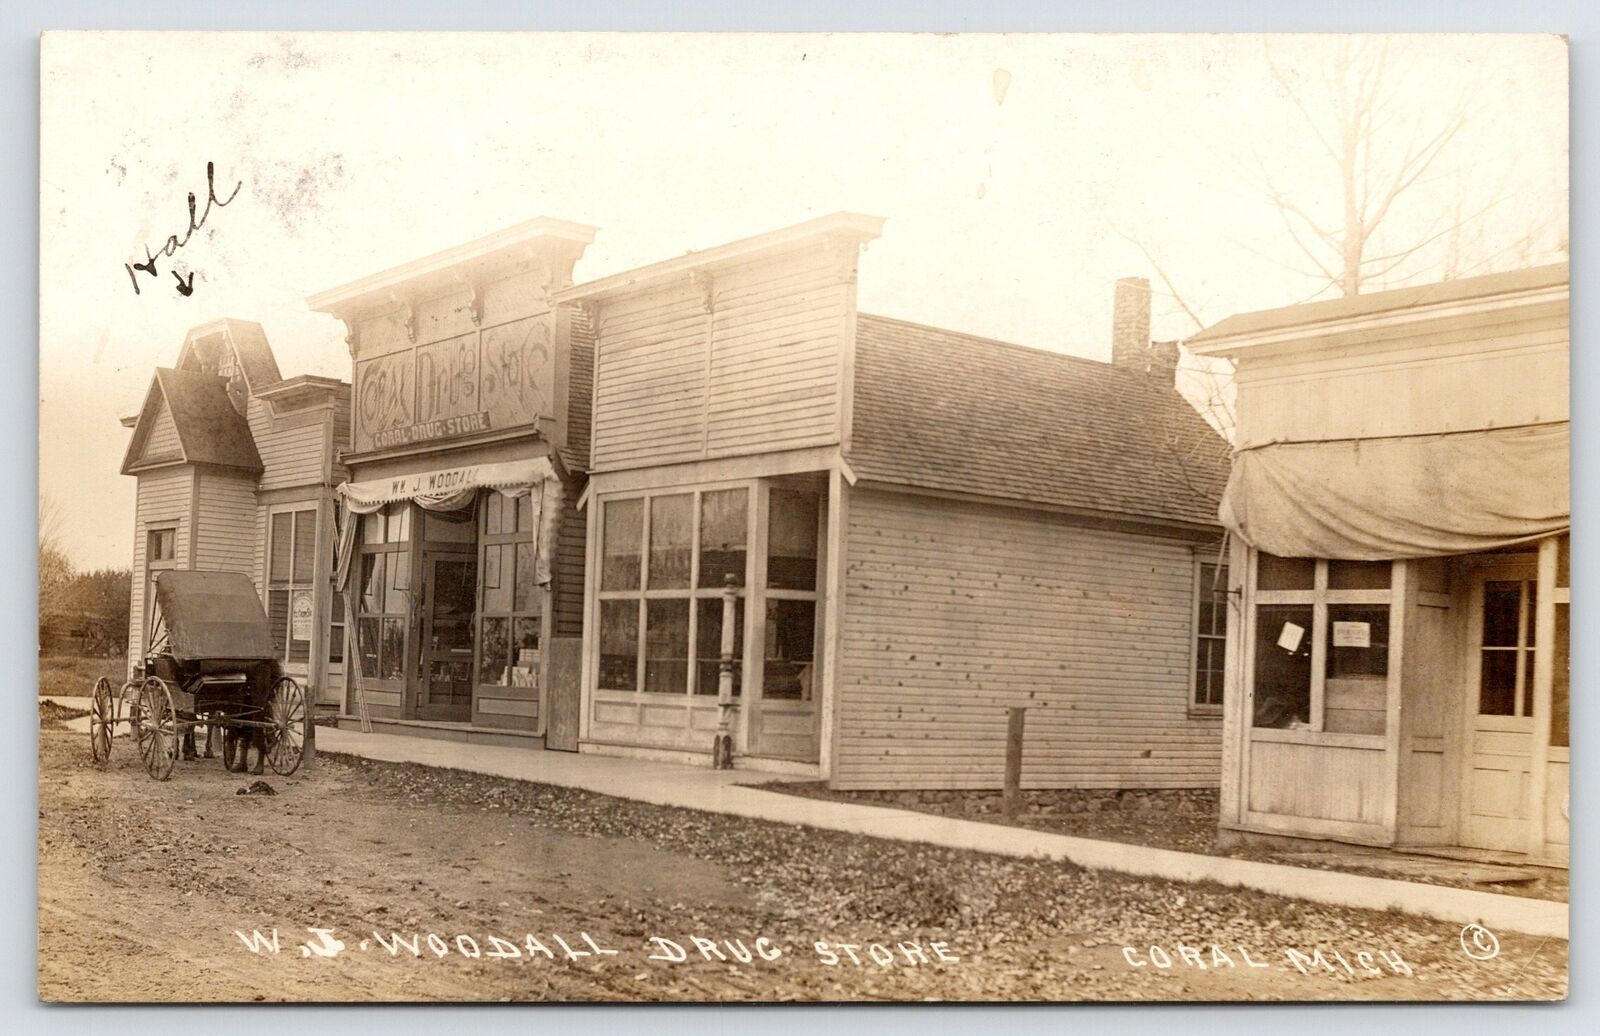 Coral MI Woodall Drug Store (Great Wood Sign)~Frank Playing For Dance 1912 RPPC